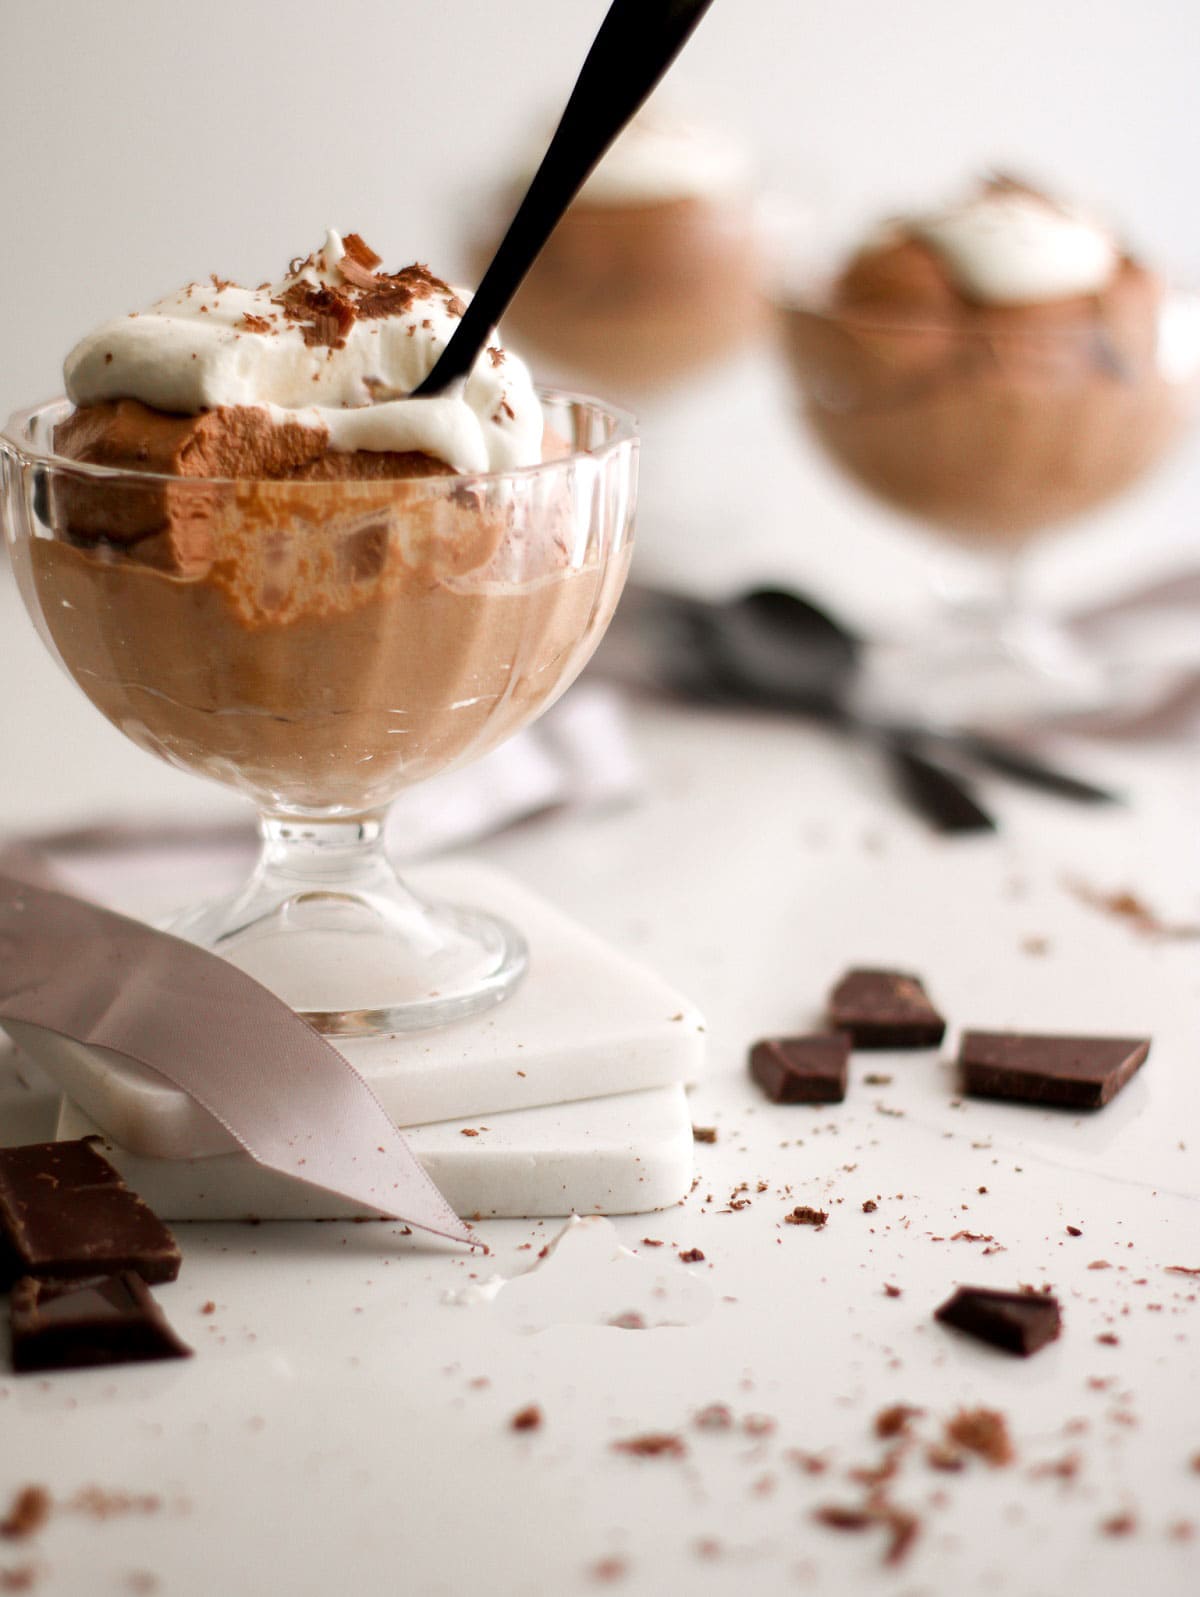 Homemade chocolate mousse in a glass serving dish with spoon.